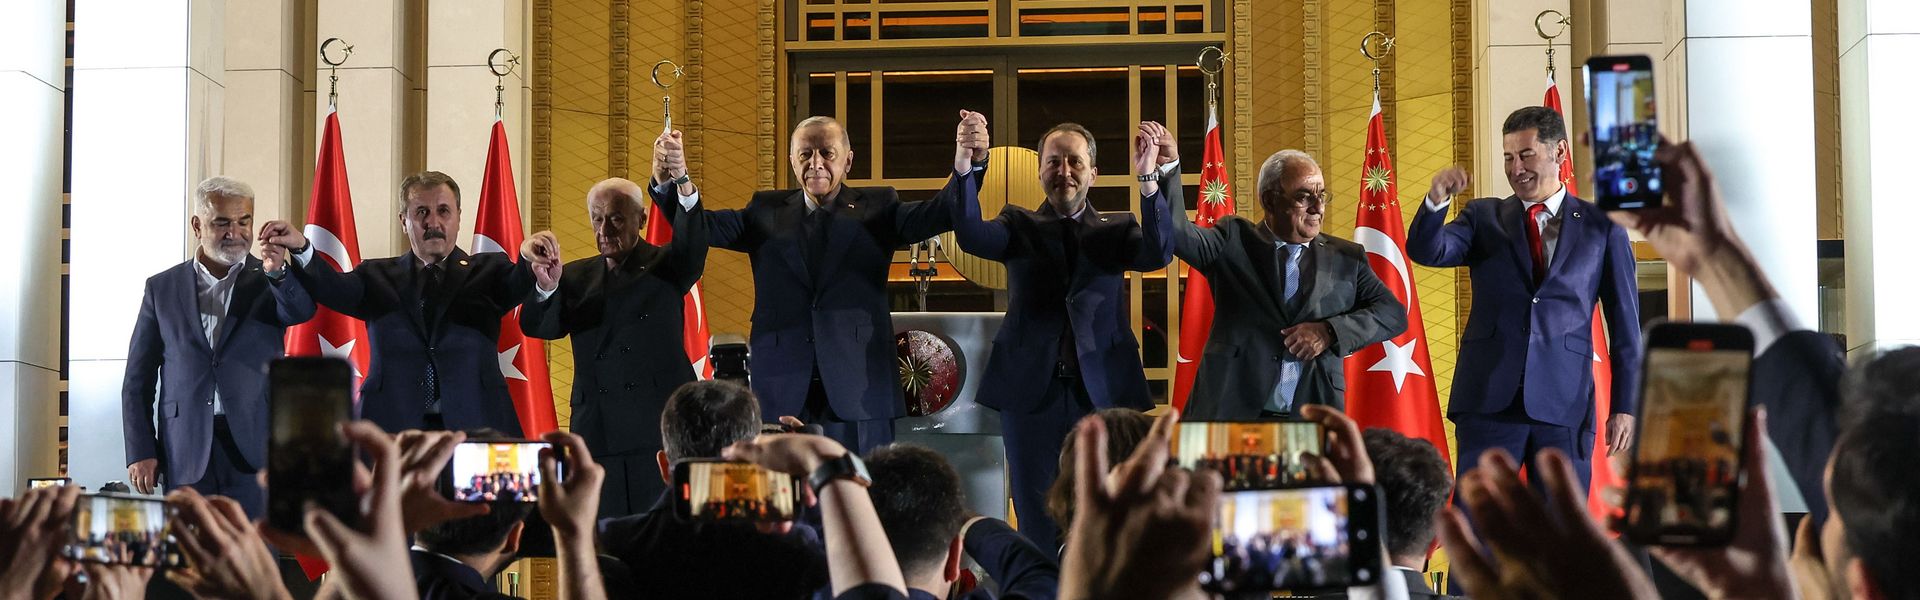 President Recep Tayyip Erdoğan addresses his supporters in front of the Presidential Palace as preliminary poll figures place him with more than 52 per cent ahead of his rival Kemal Kılıçdaroğlu during the 2023 Turkish presidential election.